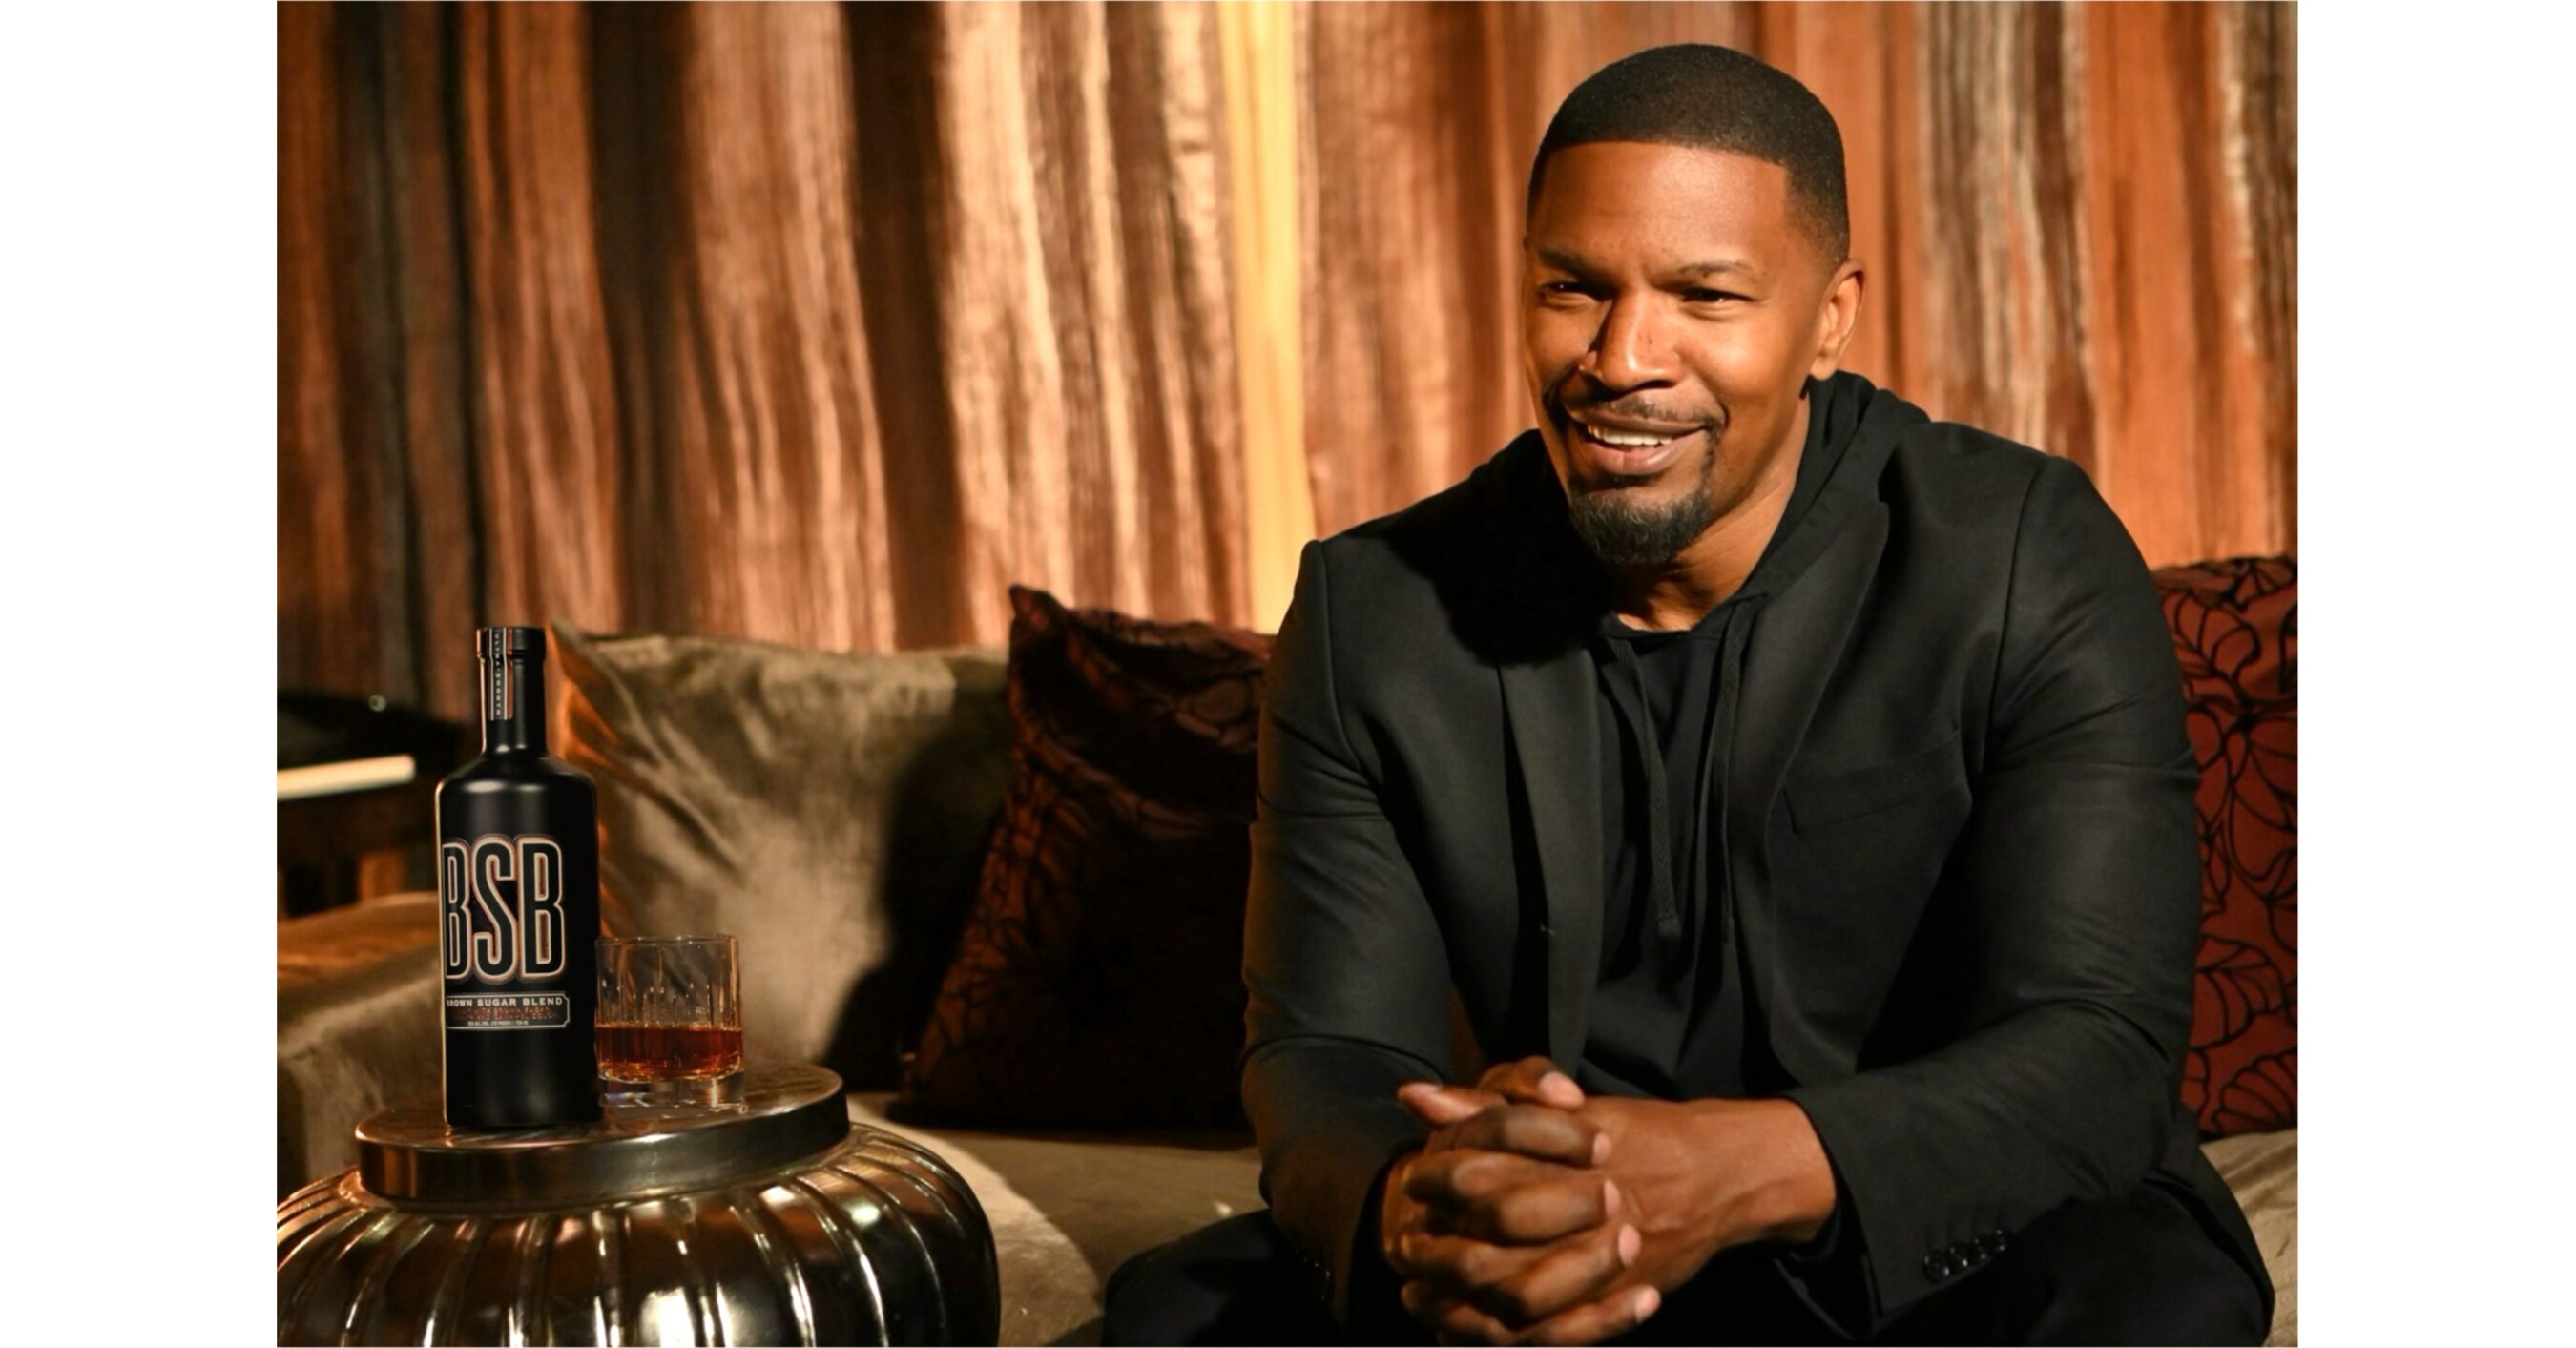 BSB WHISKEY X JAMIE FOXX OFFICIALLY UNVEIL THEIR COLLABORATION WITH ICONIC NEW PACKAGING